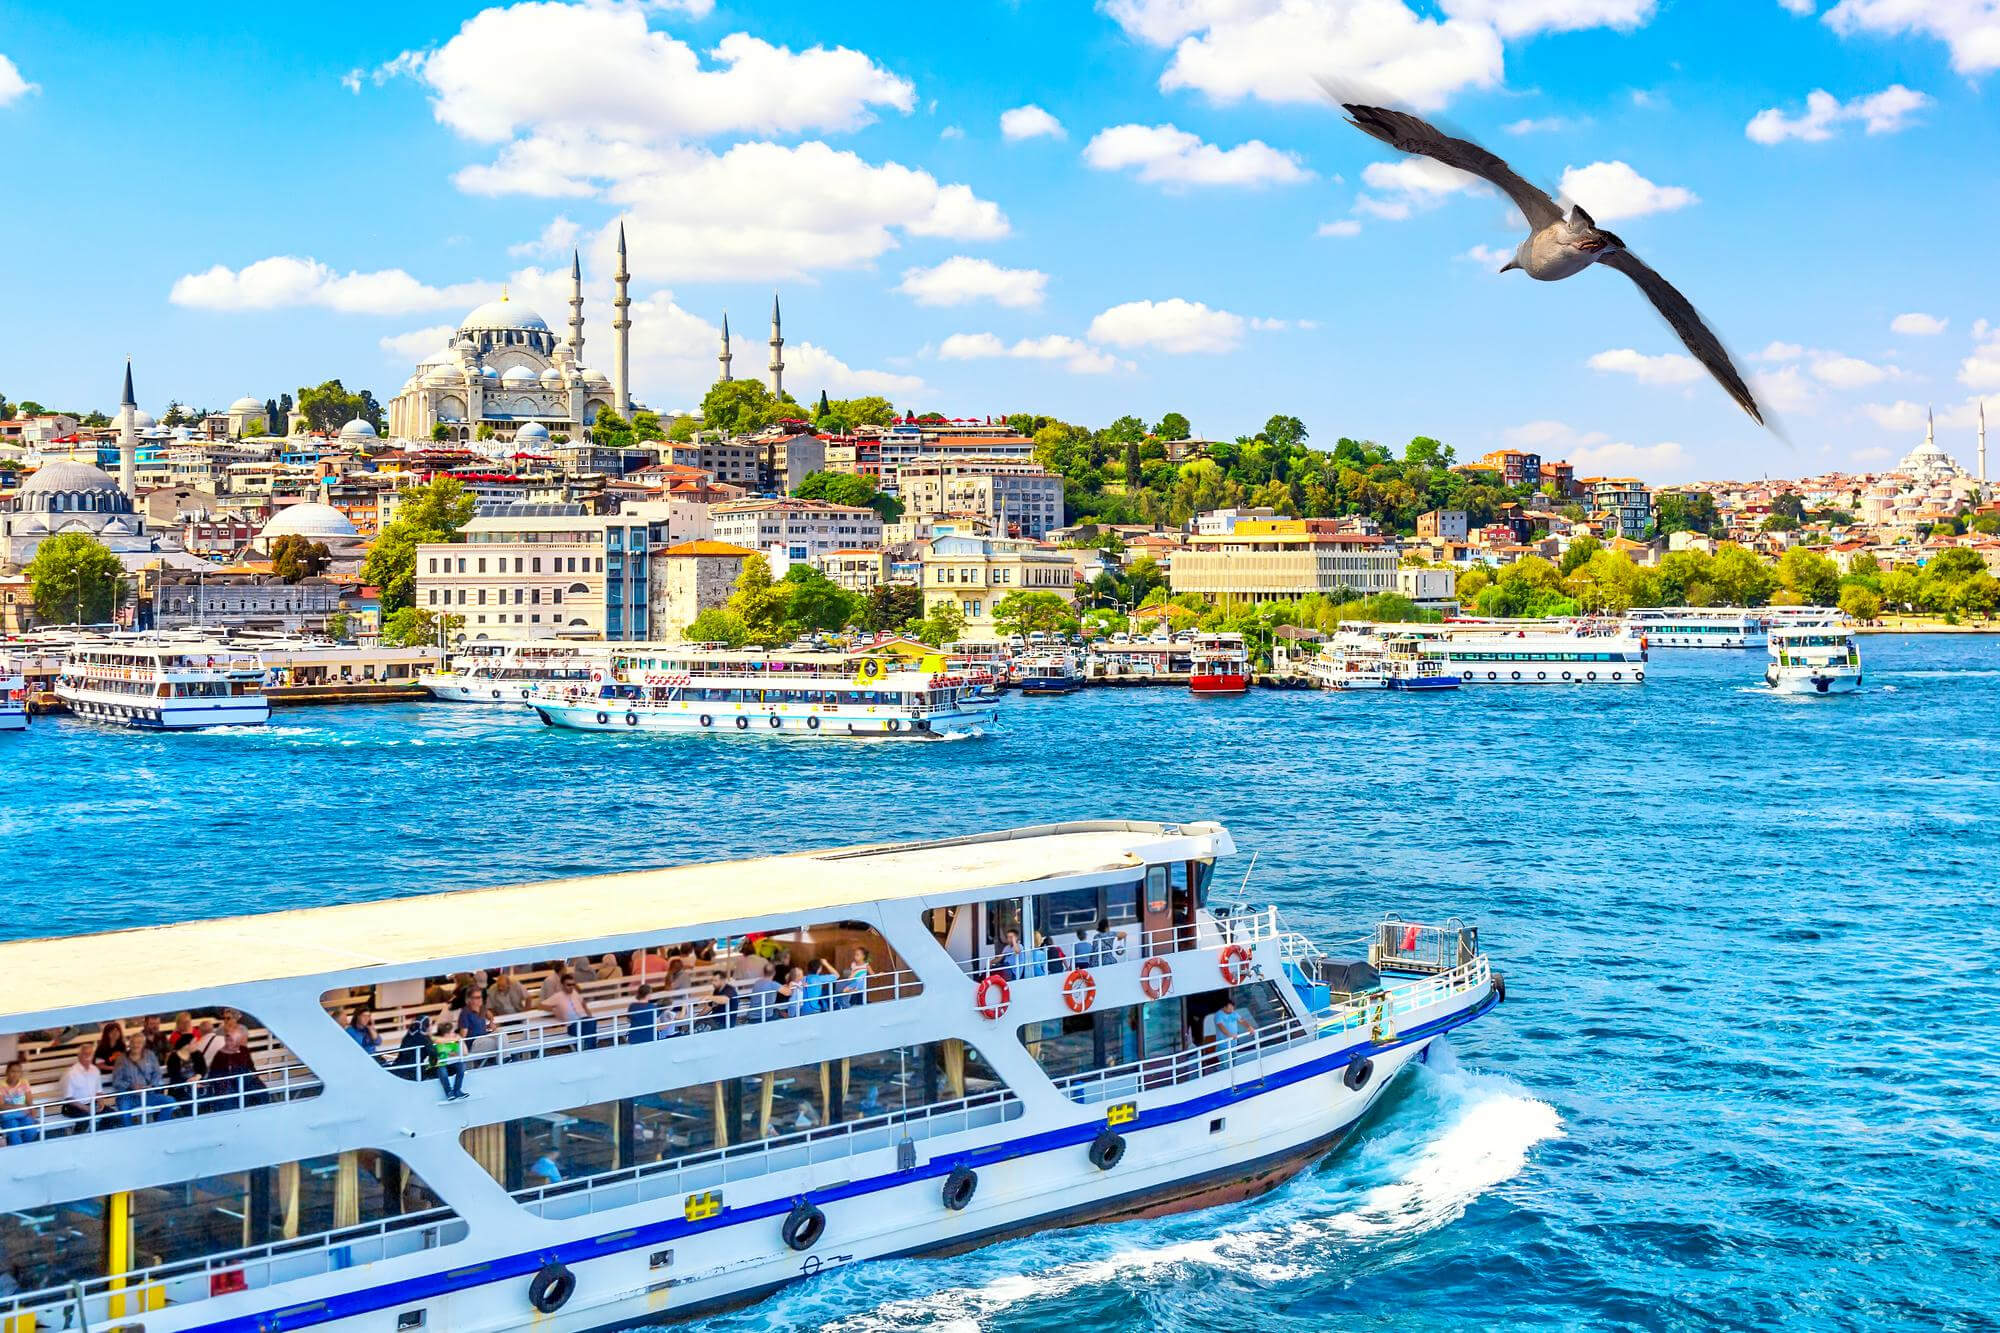 touristic-sightseeing-ships-golden-horn-bay-istanbul-view-suleymaniye-mosque-with-sultanahmet-district-seagull-foreground-istanbul-turkey-during-sunny-summer